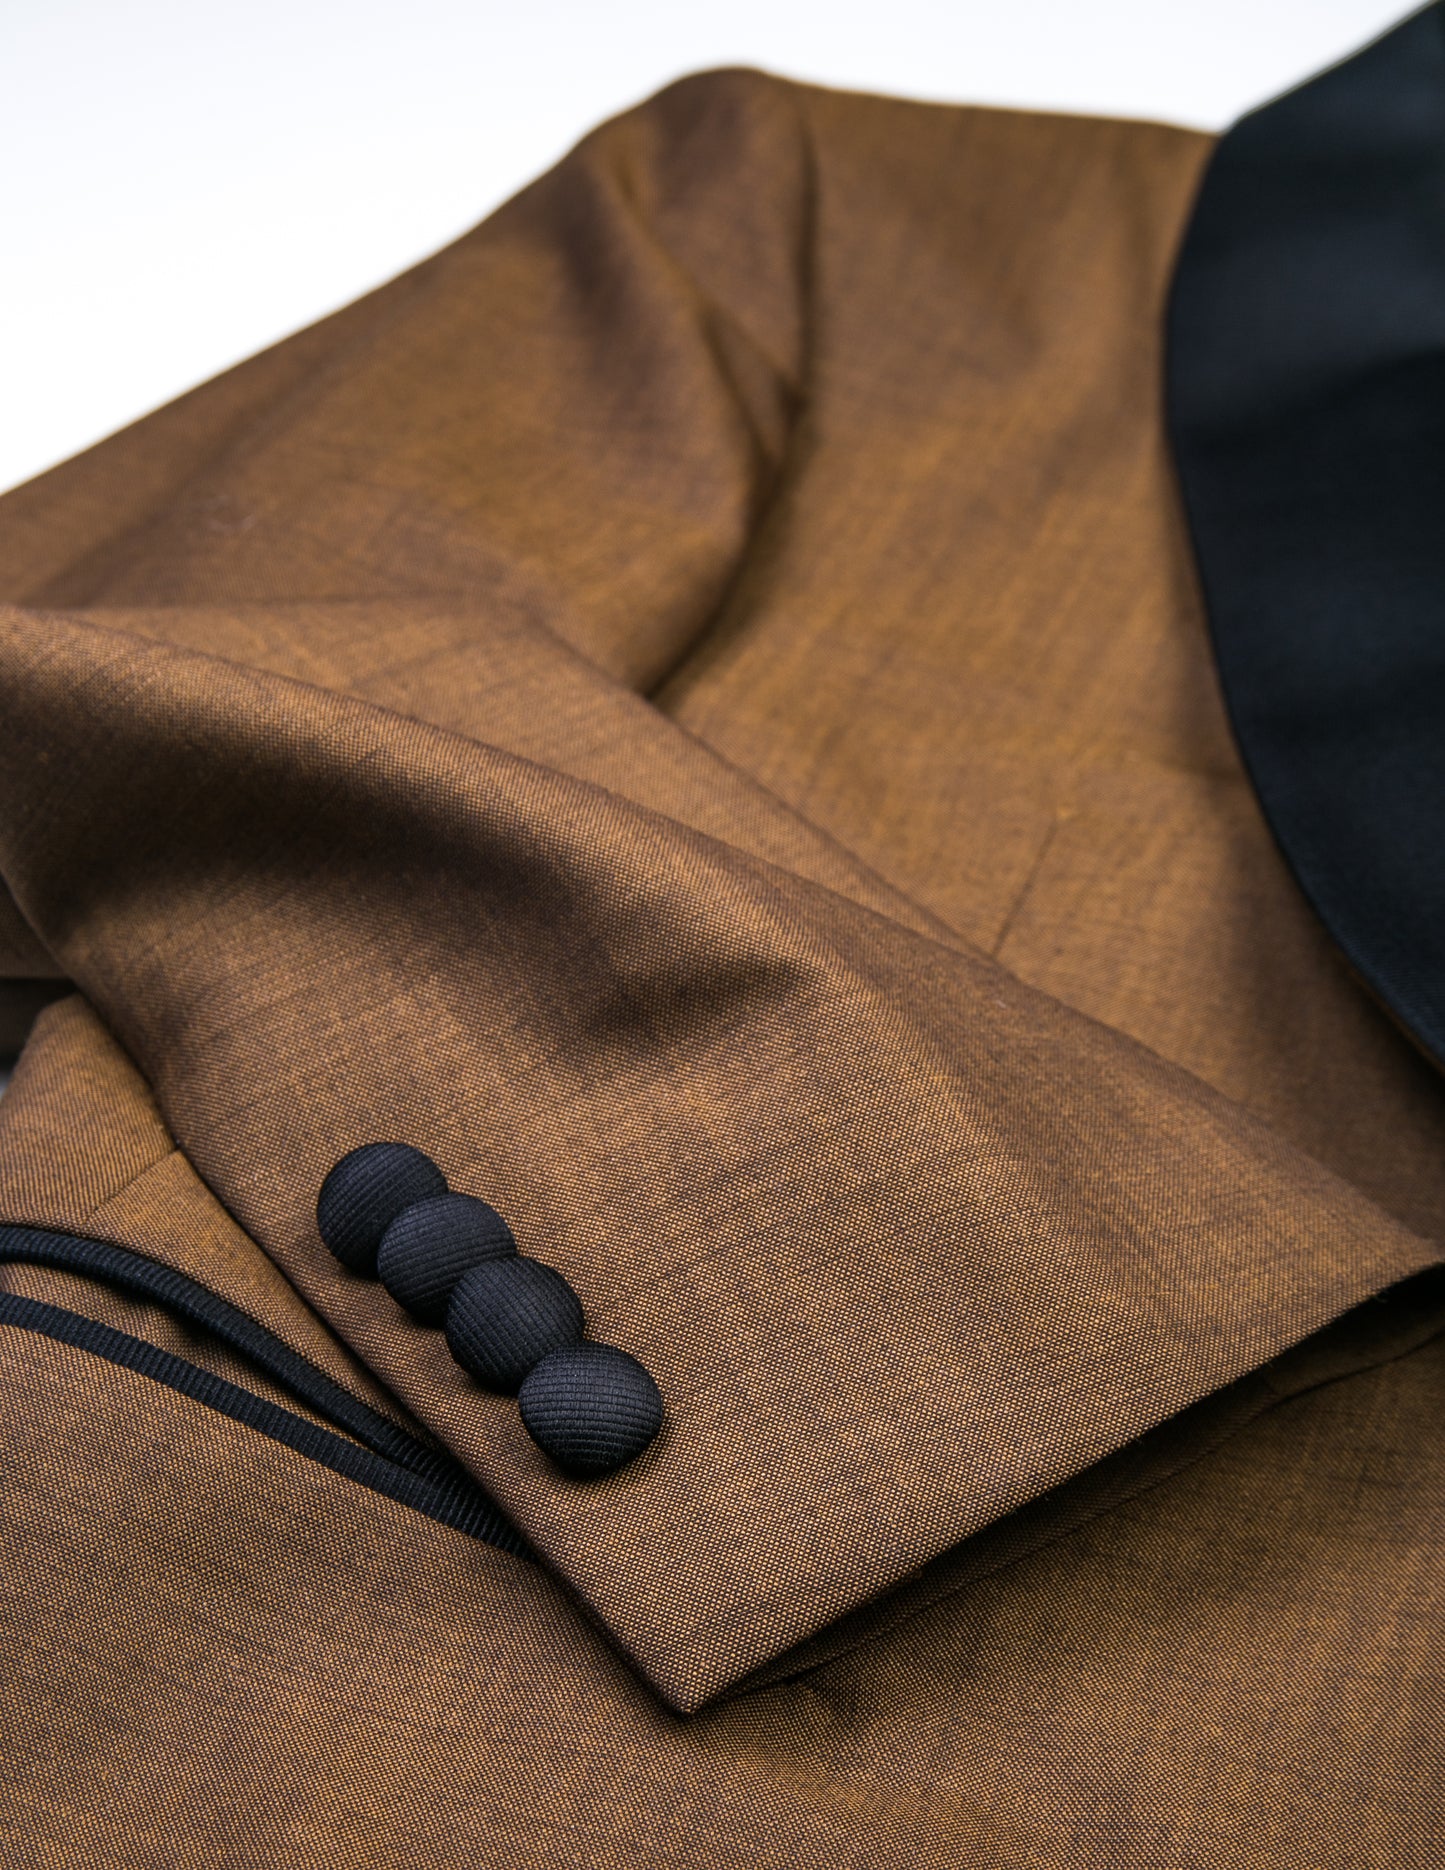 Detail of BKT50 Shawl Collar Dinner Jacket - Copper showing cuff with covered buttons